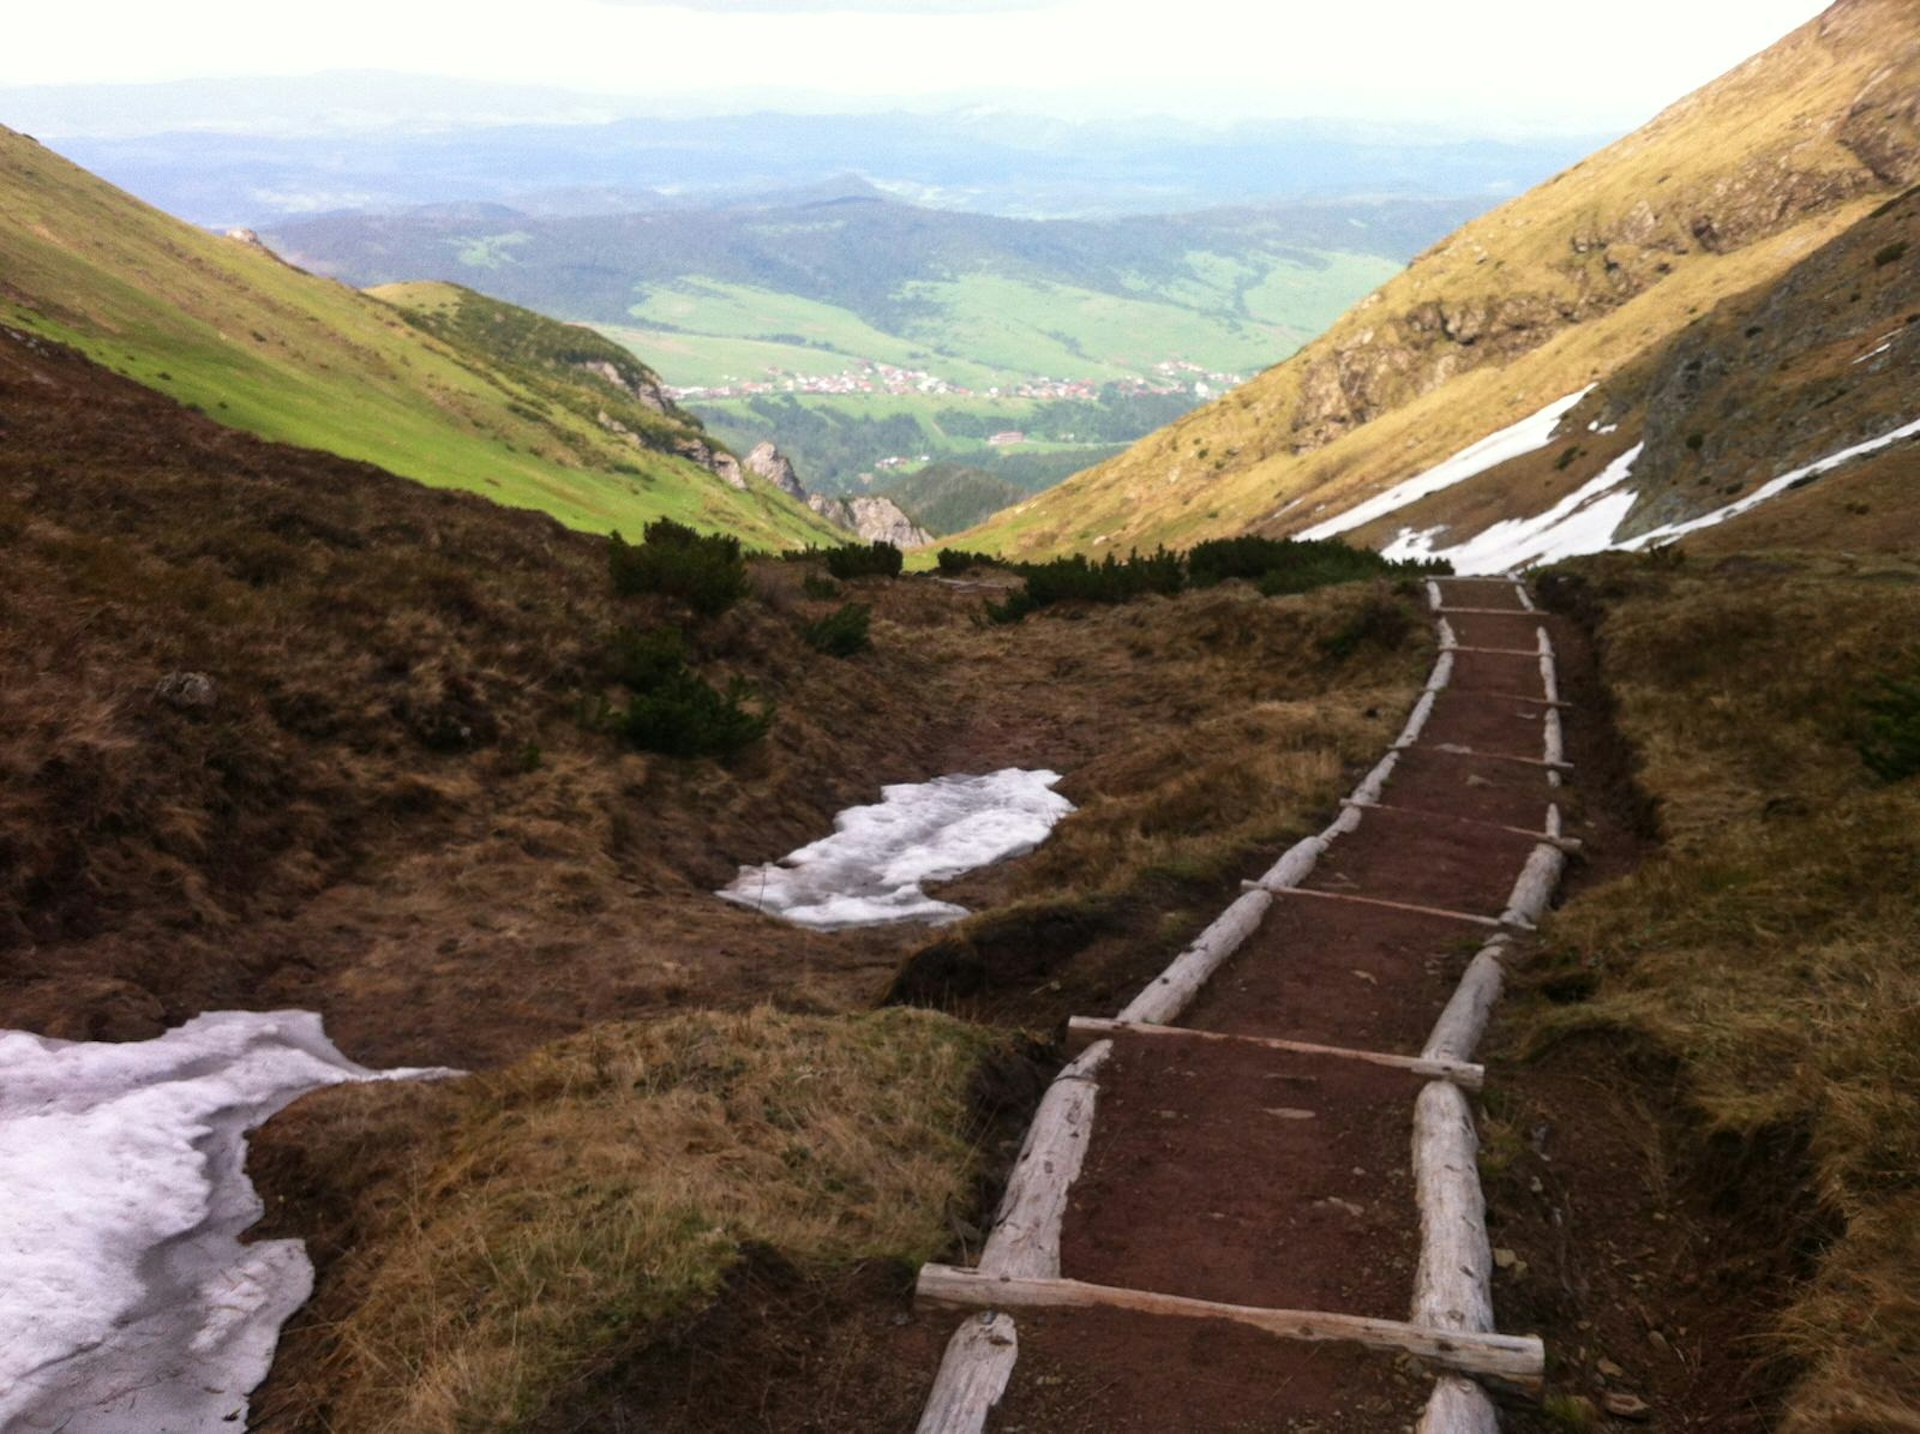 A basic path made from logs and soil snakes down the hillside, with a view of the lush valley in the distance